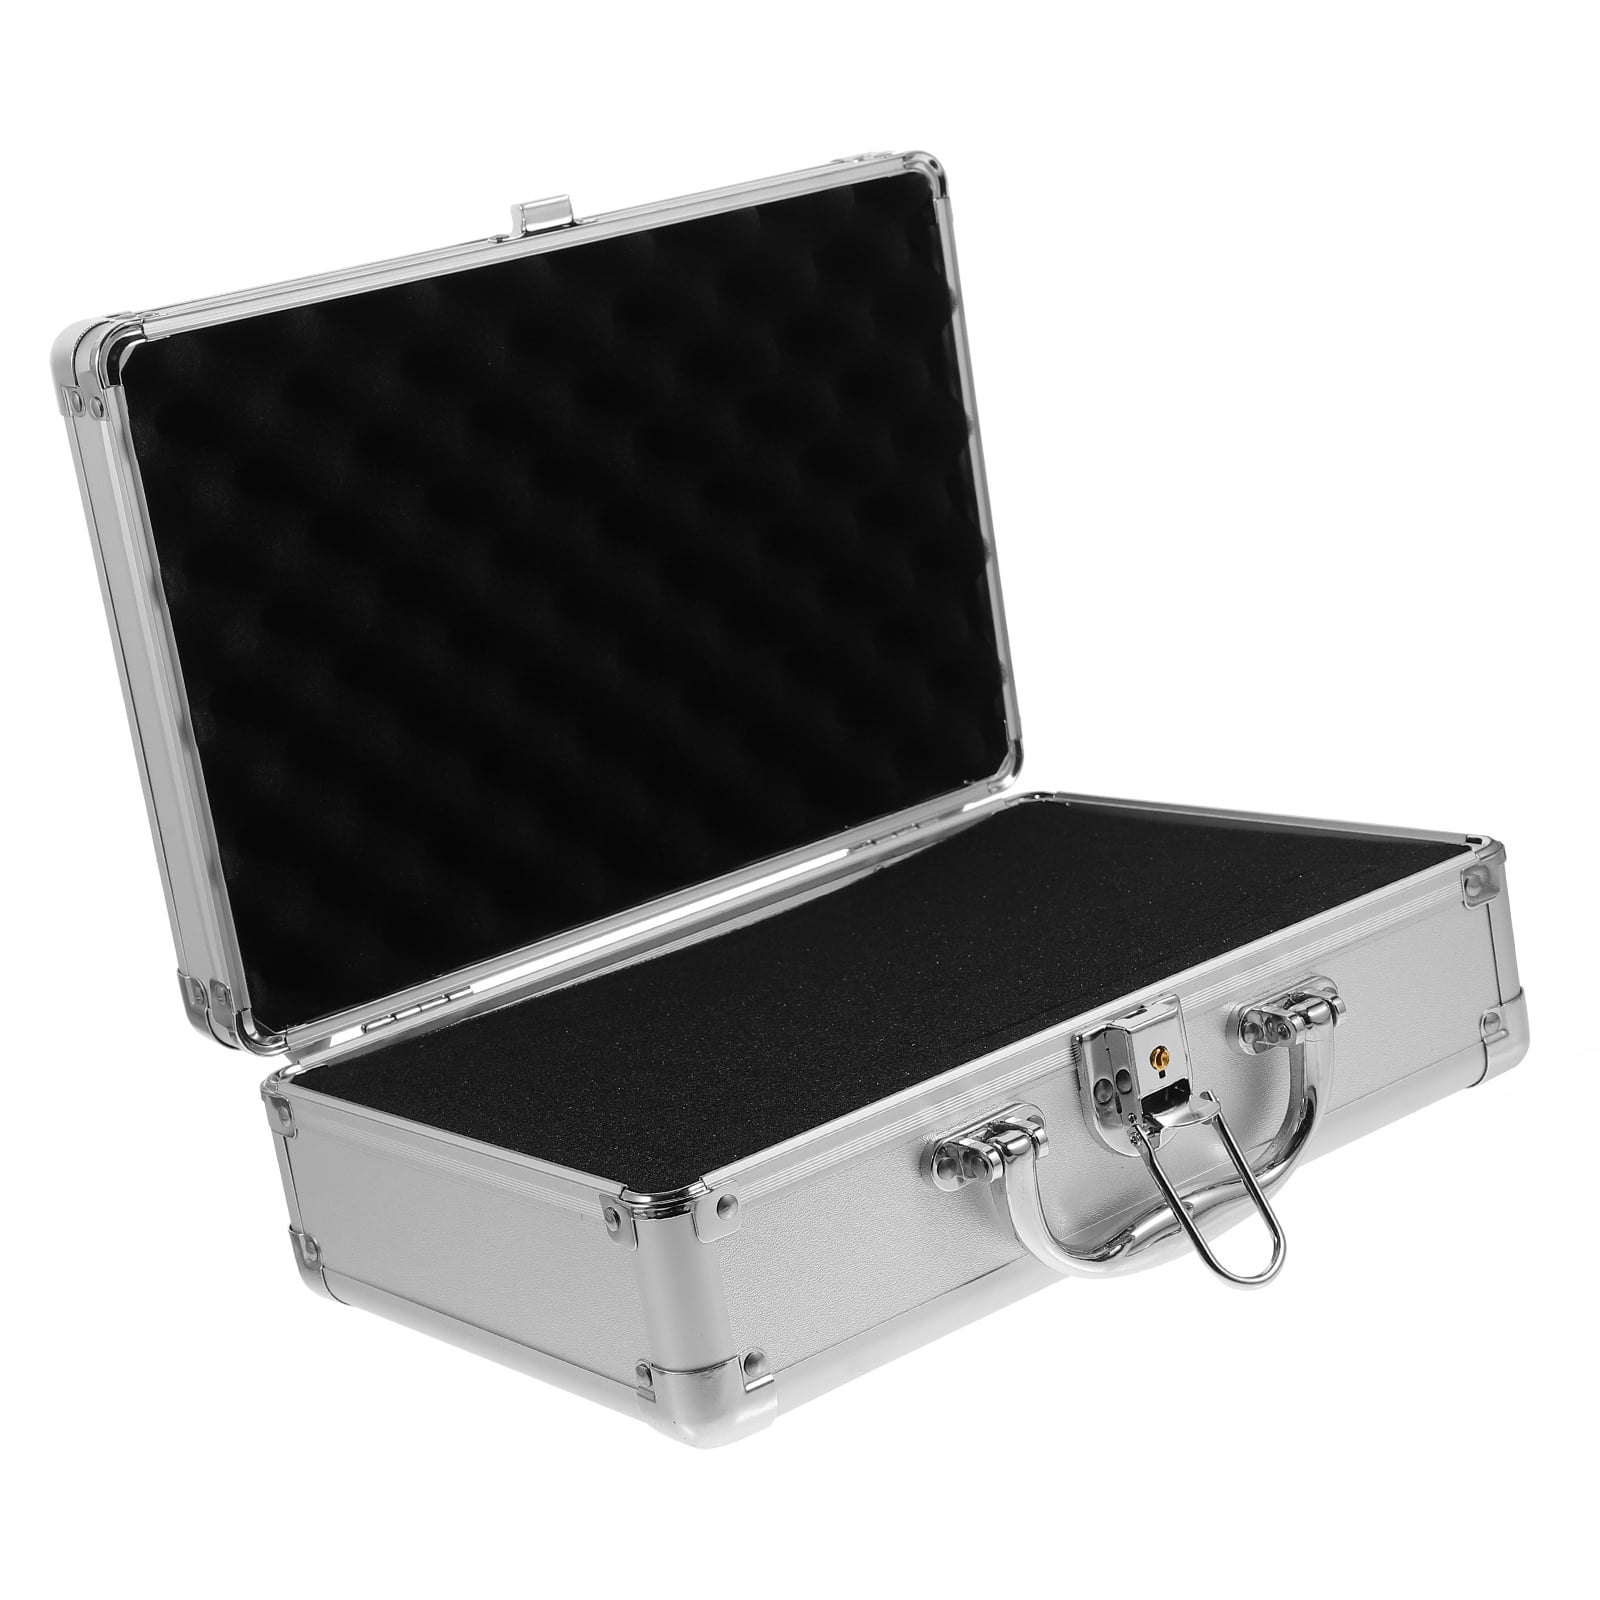 Aluminum Alloy Gun Case: Durable Storage For Toys, Tools & Display Boxes  230613 From Fan03, $25.25